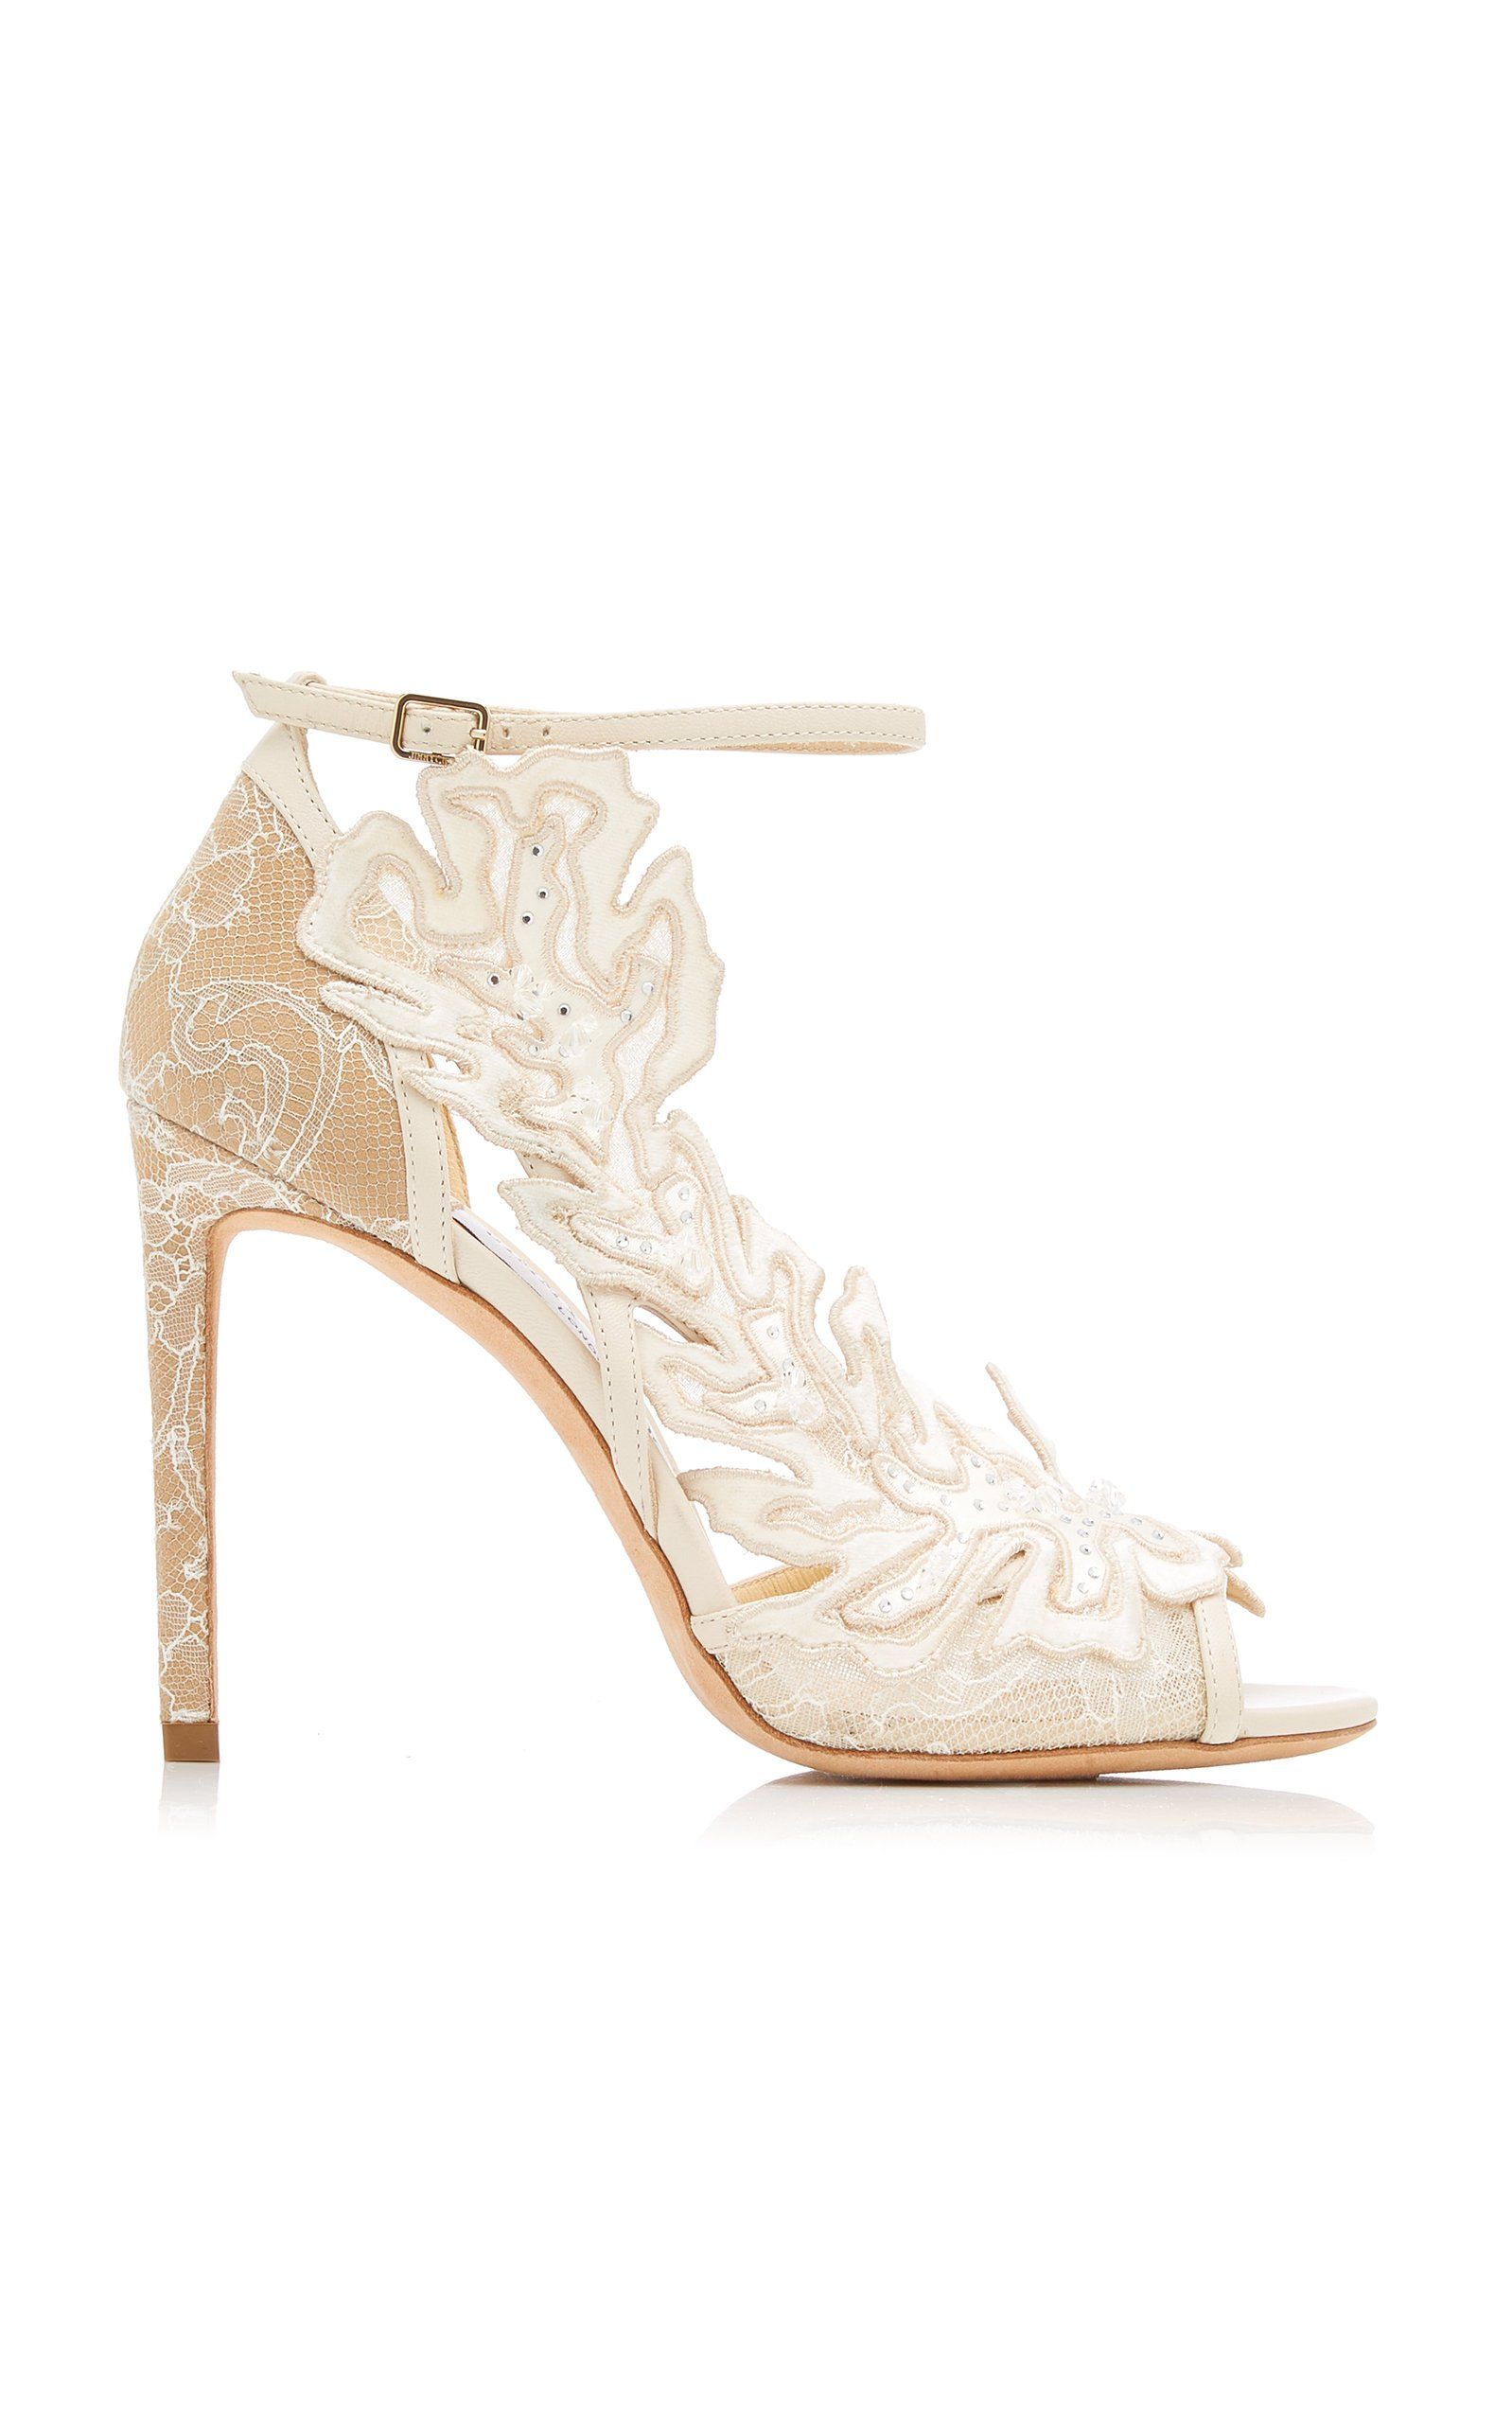 Shoes gold wedding white and Wedding Shoes